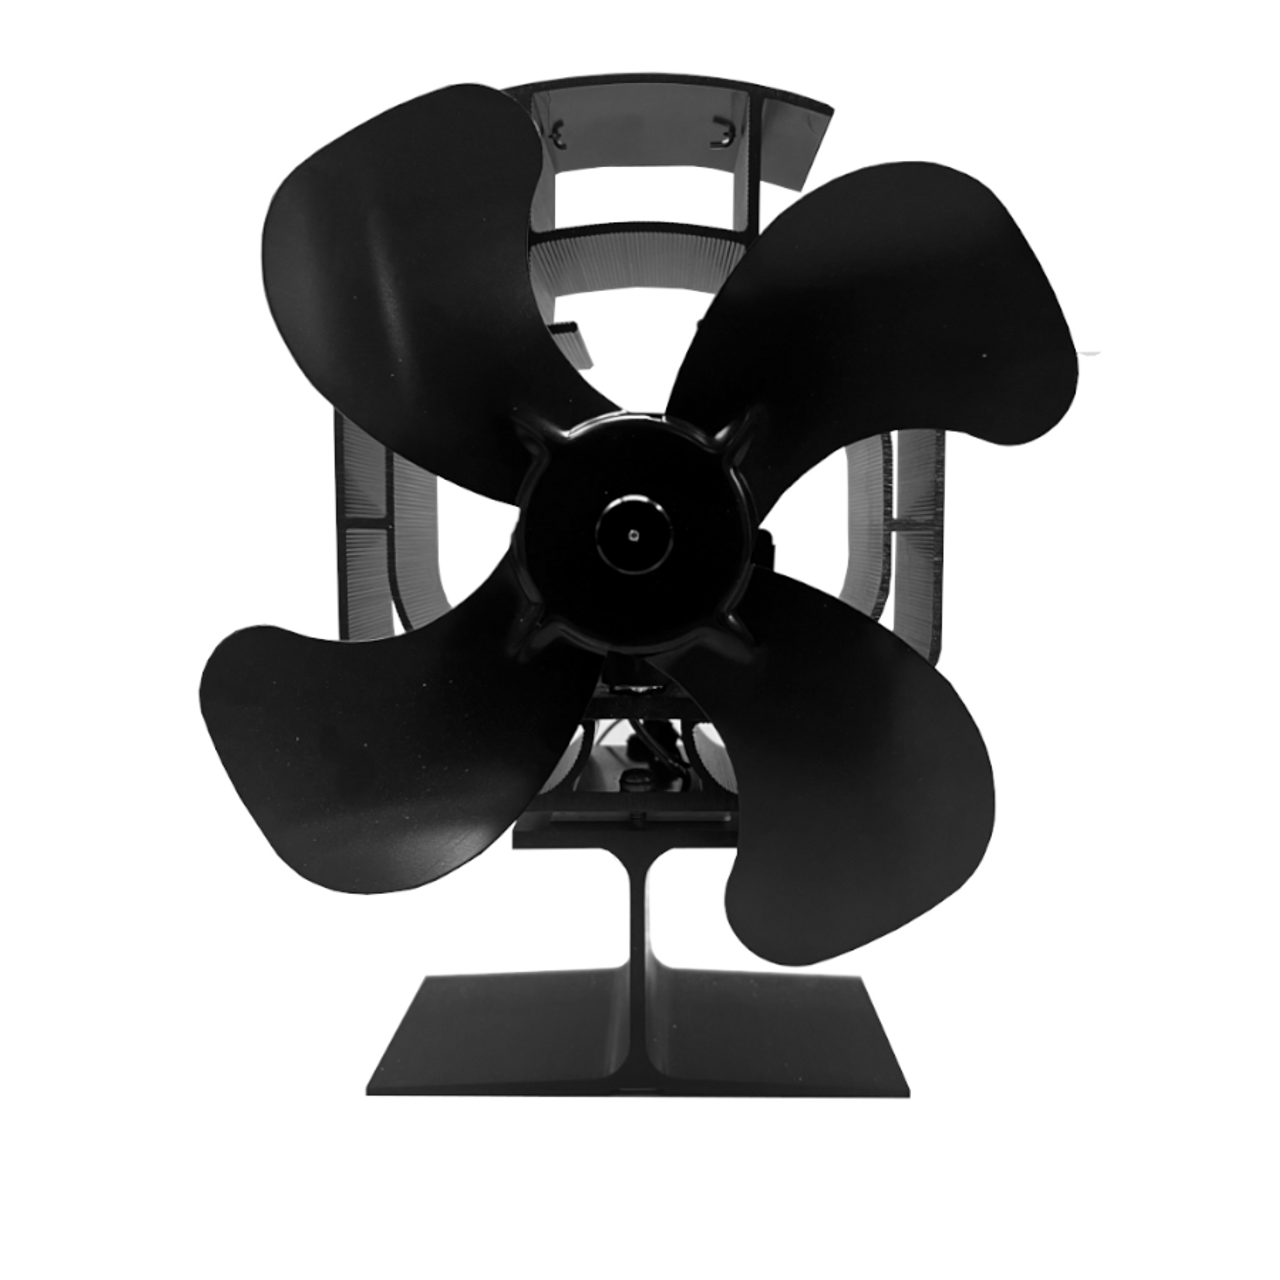 STOVE FAN WITH OSCILLATING FEATURE